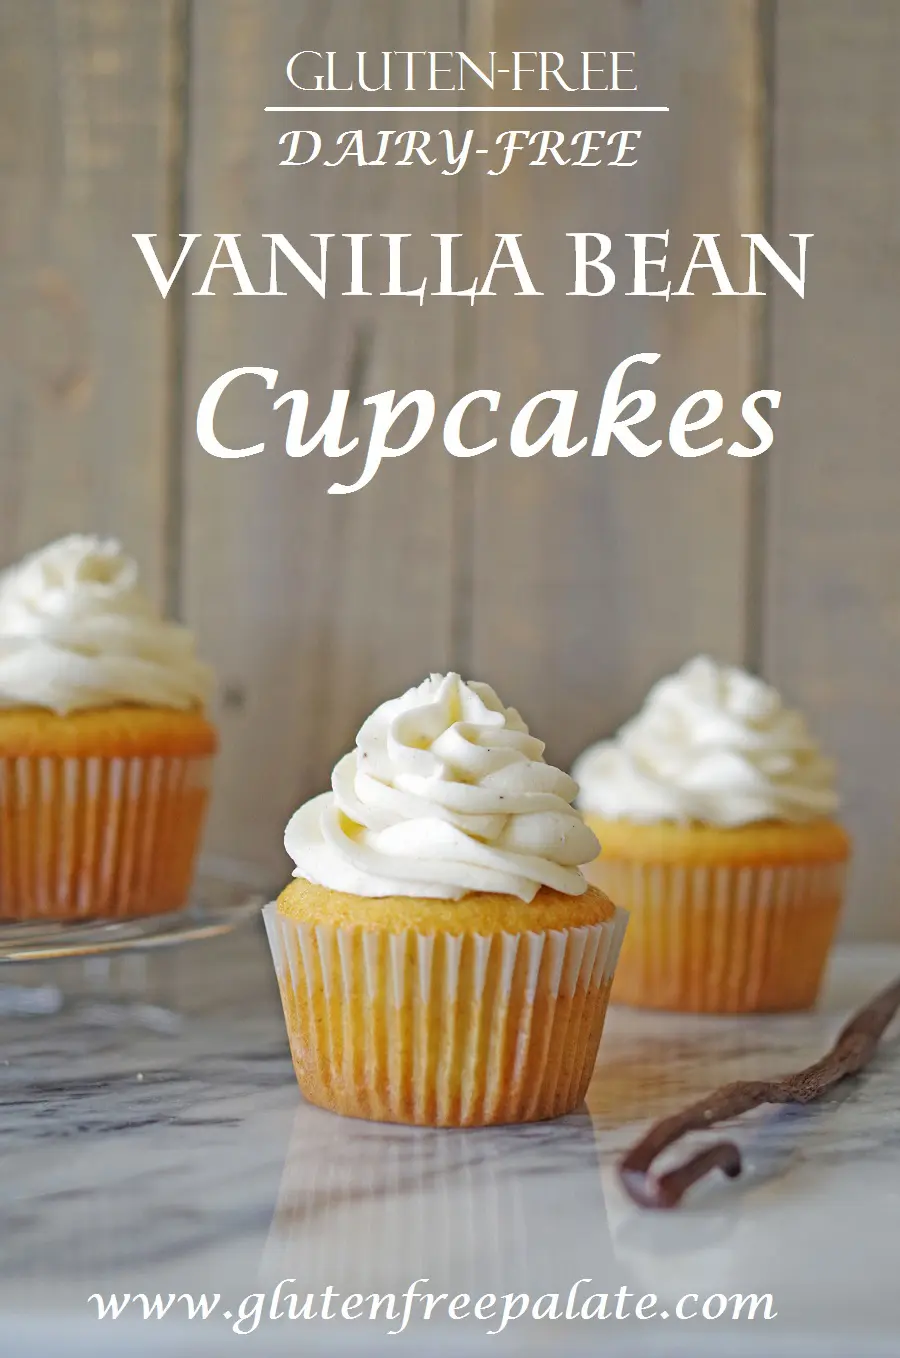 a pinterest pin of a photo of a cupcake with white frosting with the words gluten-free dairy-free vanilla bean cupcakes at the top